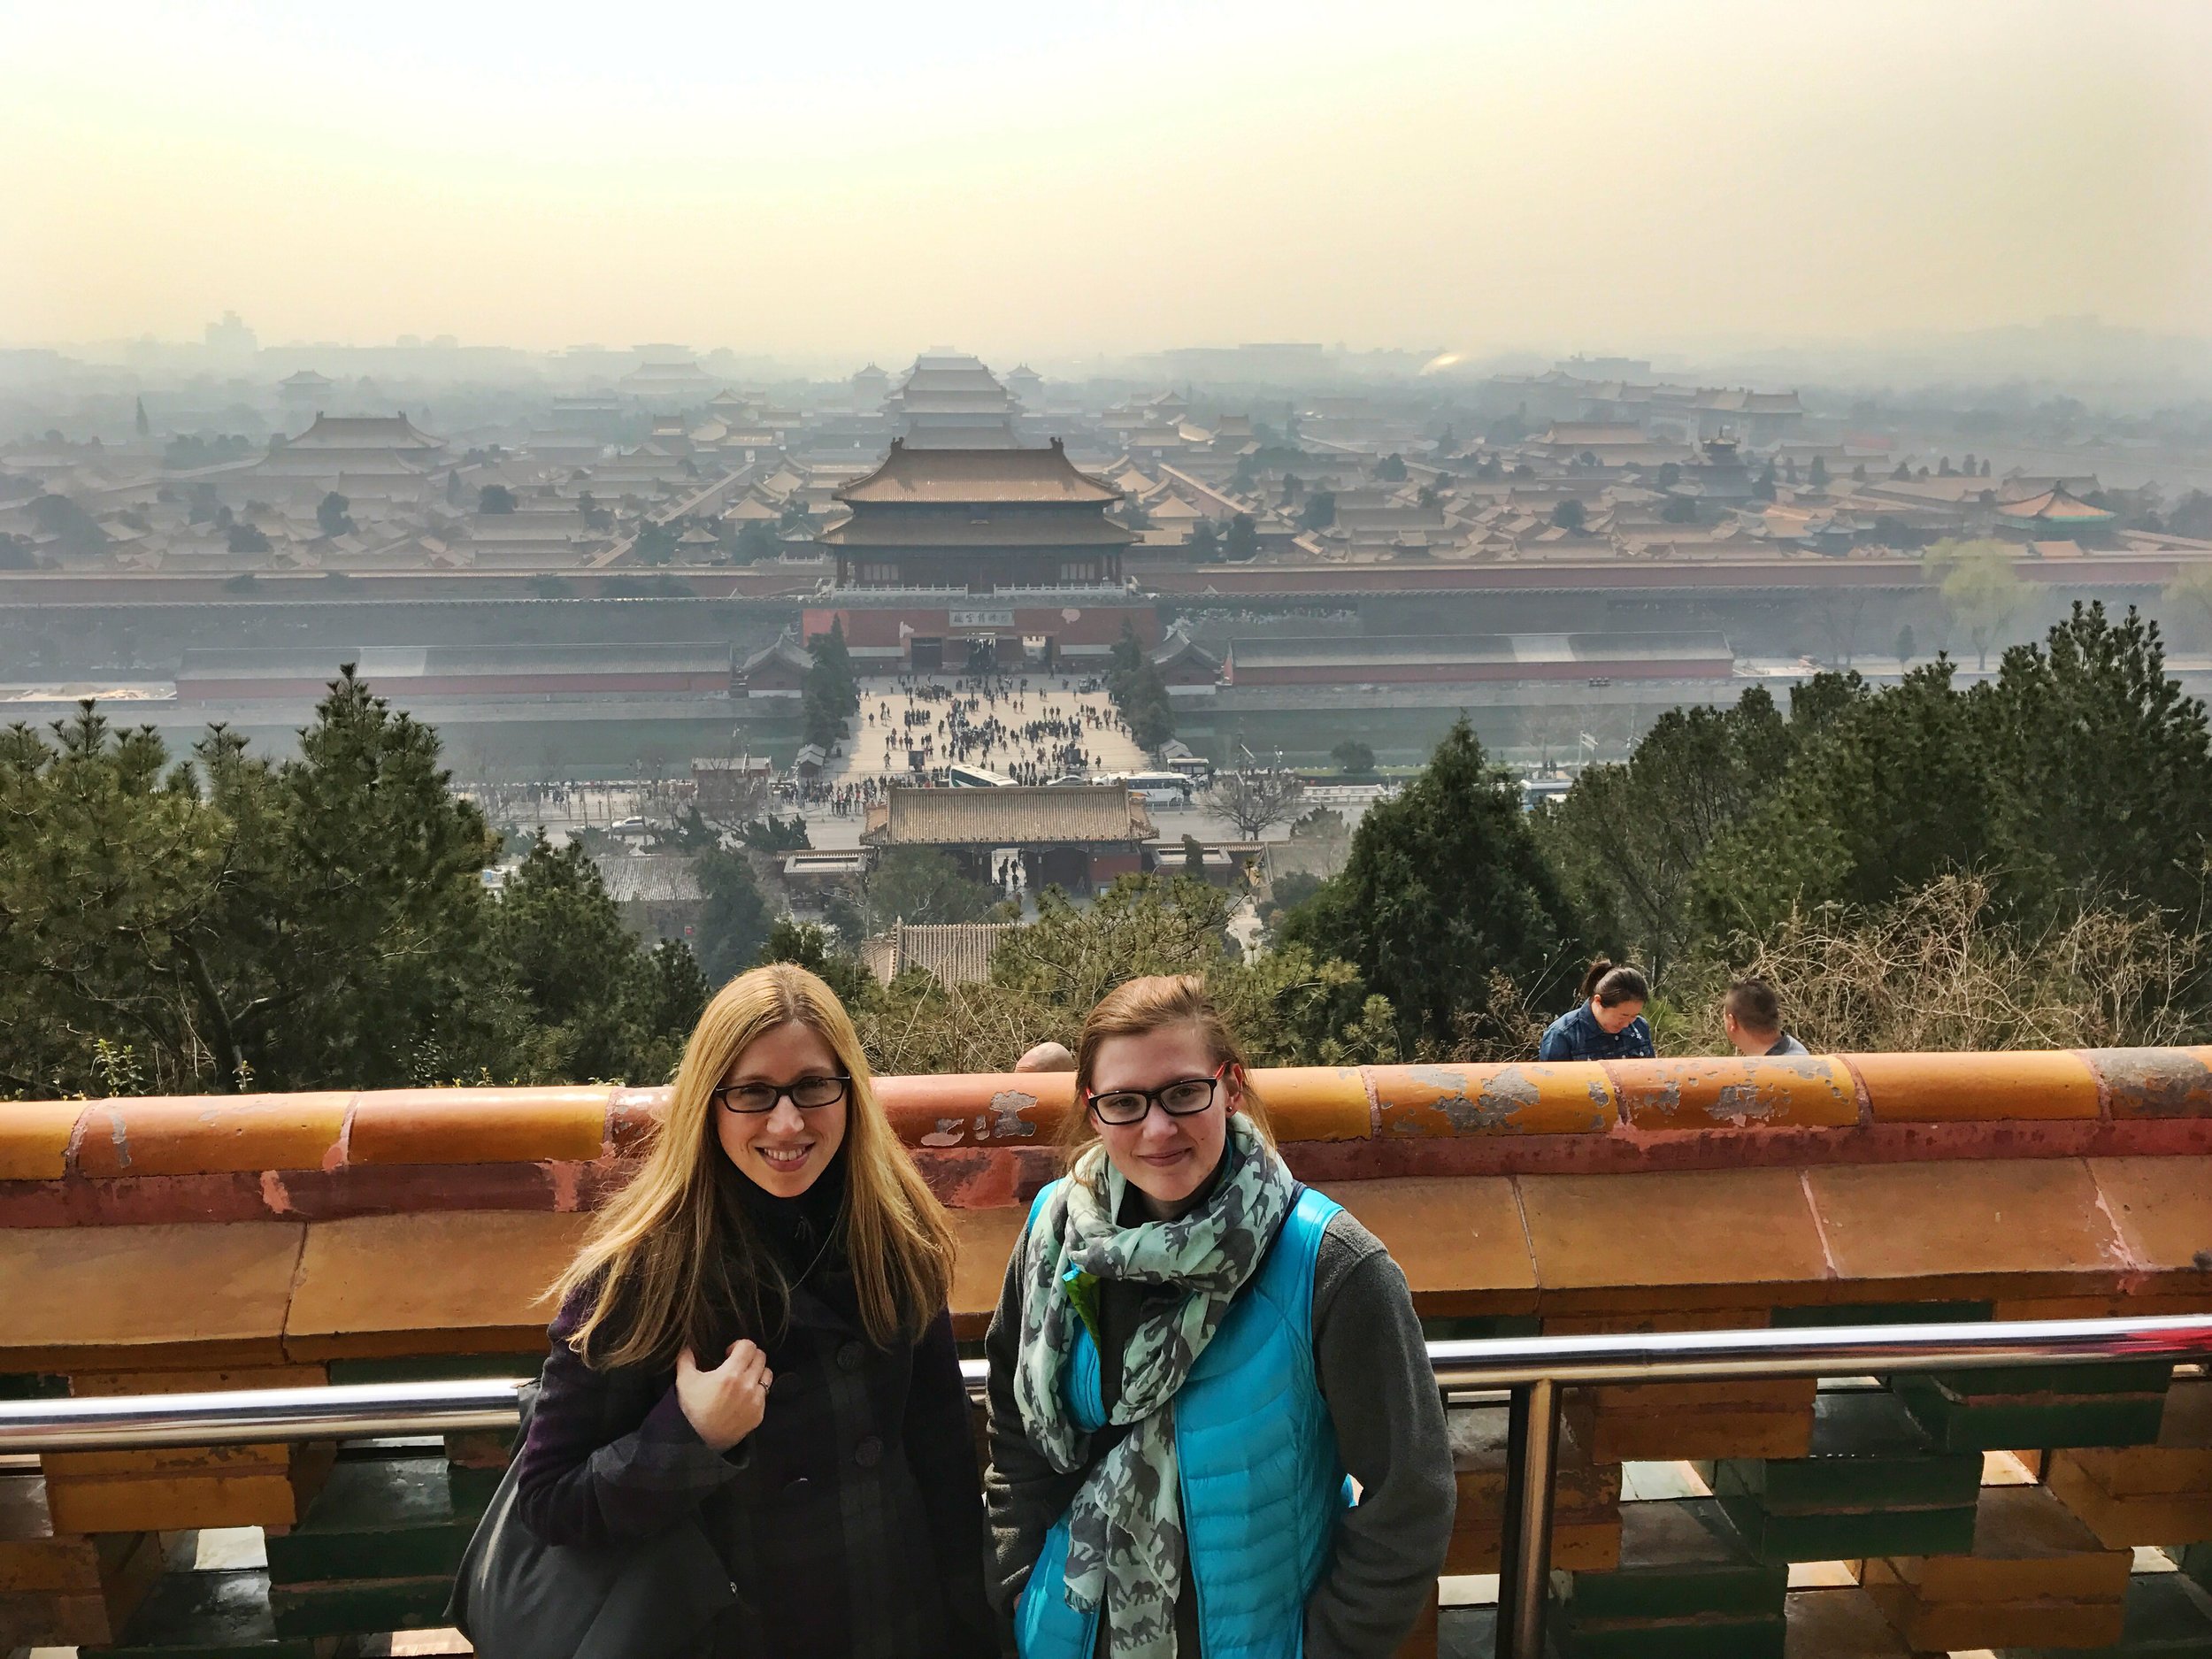  Janet and Kimmy with the "Forbidden City" behind them in Beijing. 